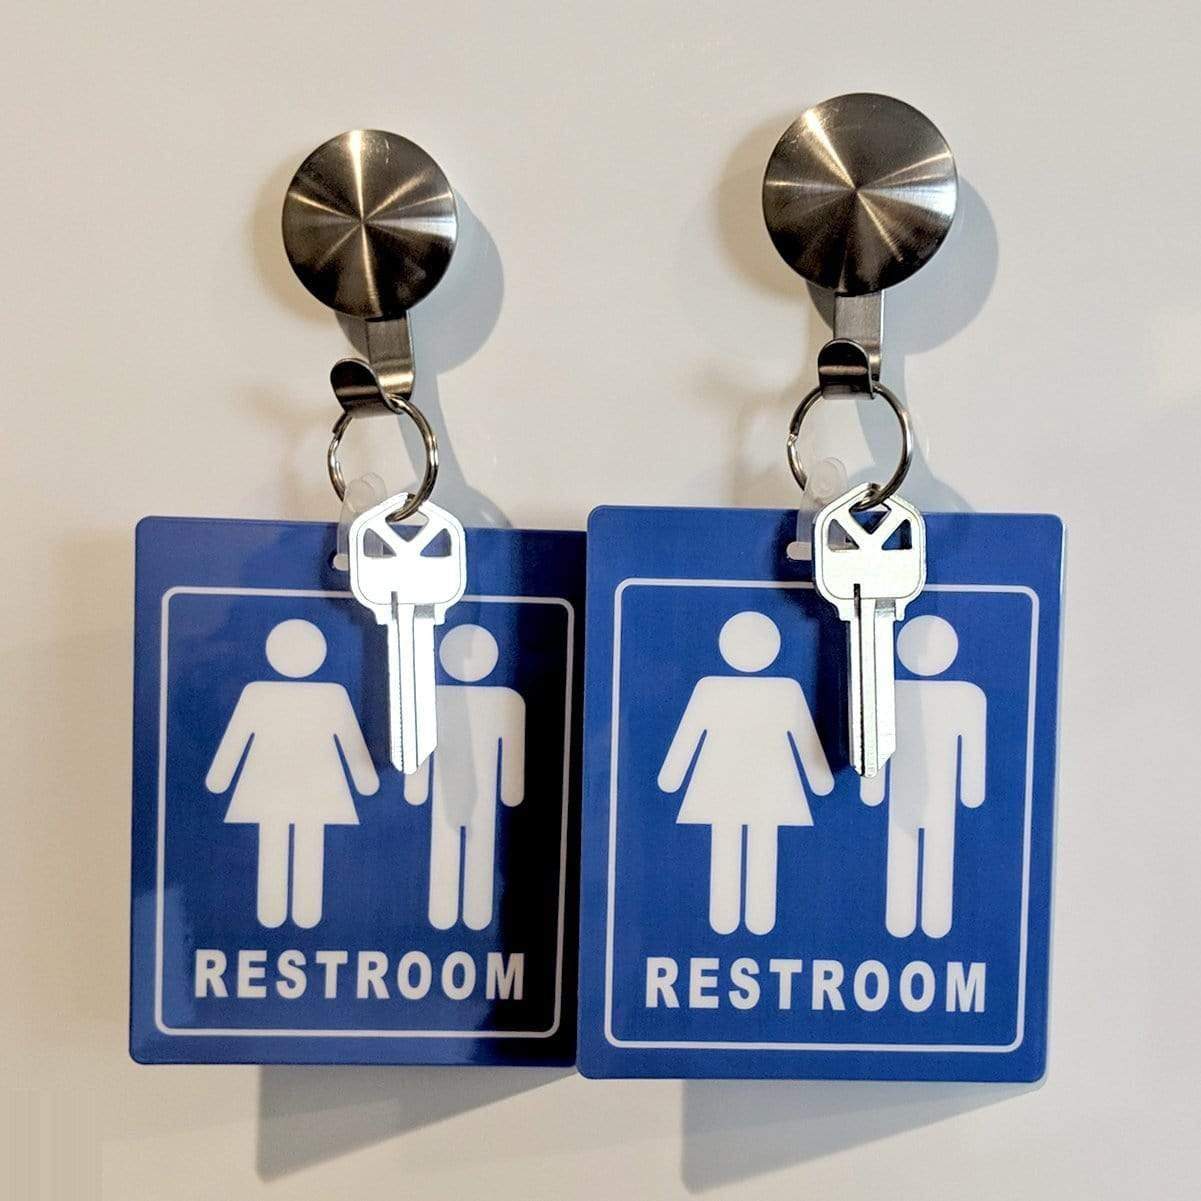 Two Unisex Restroom Pass Keychains - Bathroom Tag with Key Chain Ring - Heavy Duty Large Passes for Unisex & Family Restrooms with Key Holder (Sold in 2 Pack) (SPID-9840-Blue), each hanging from metal hooks.